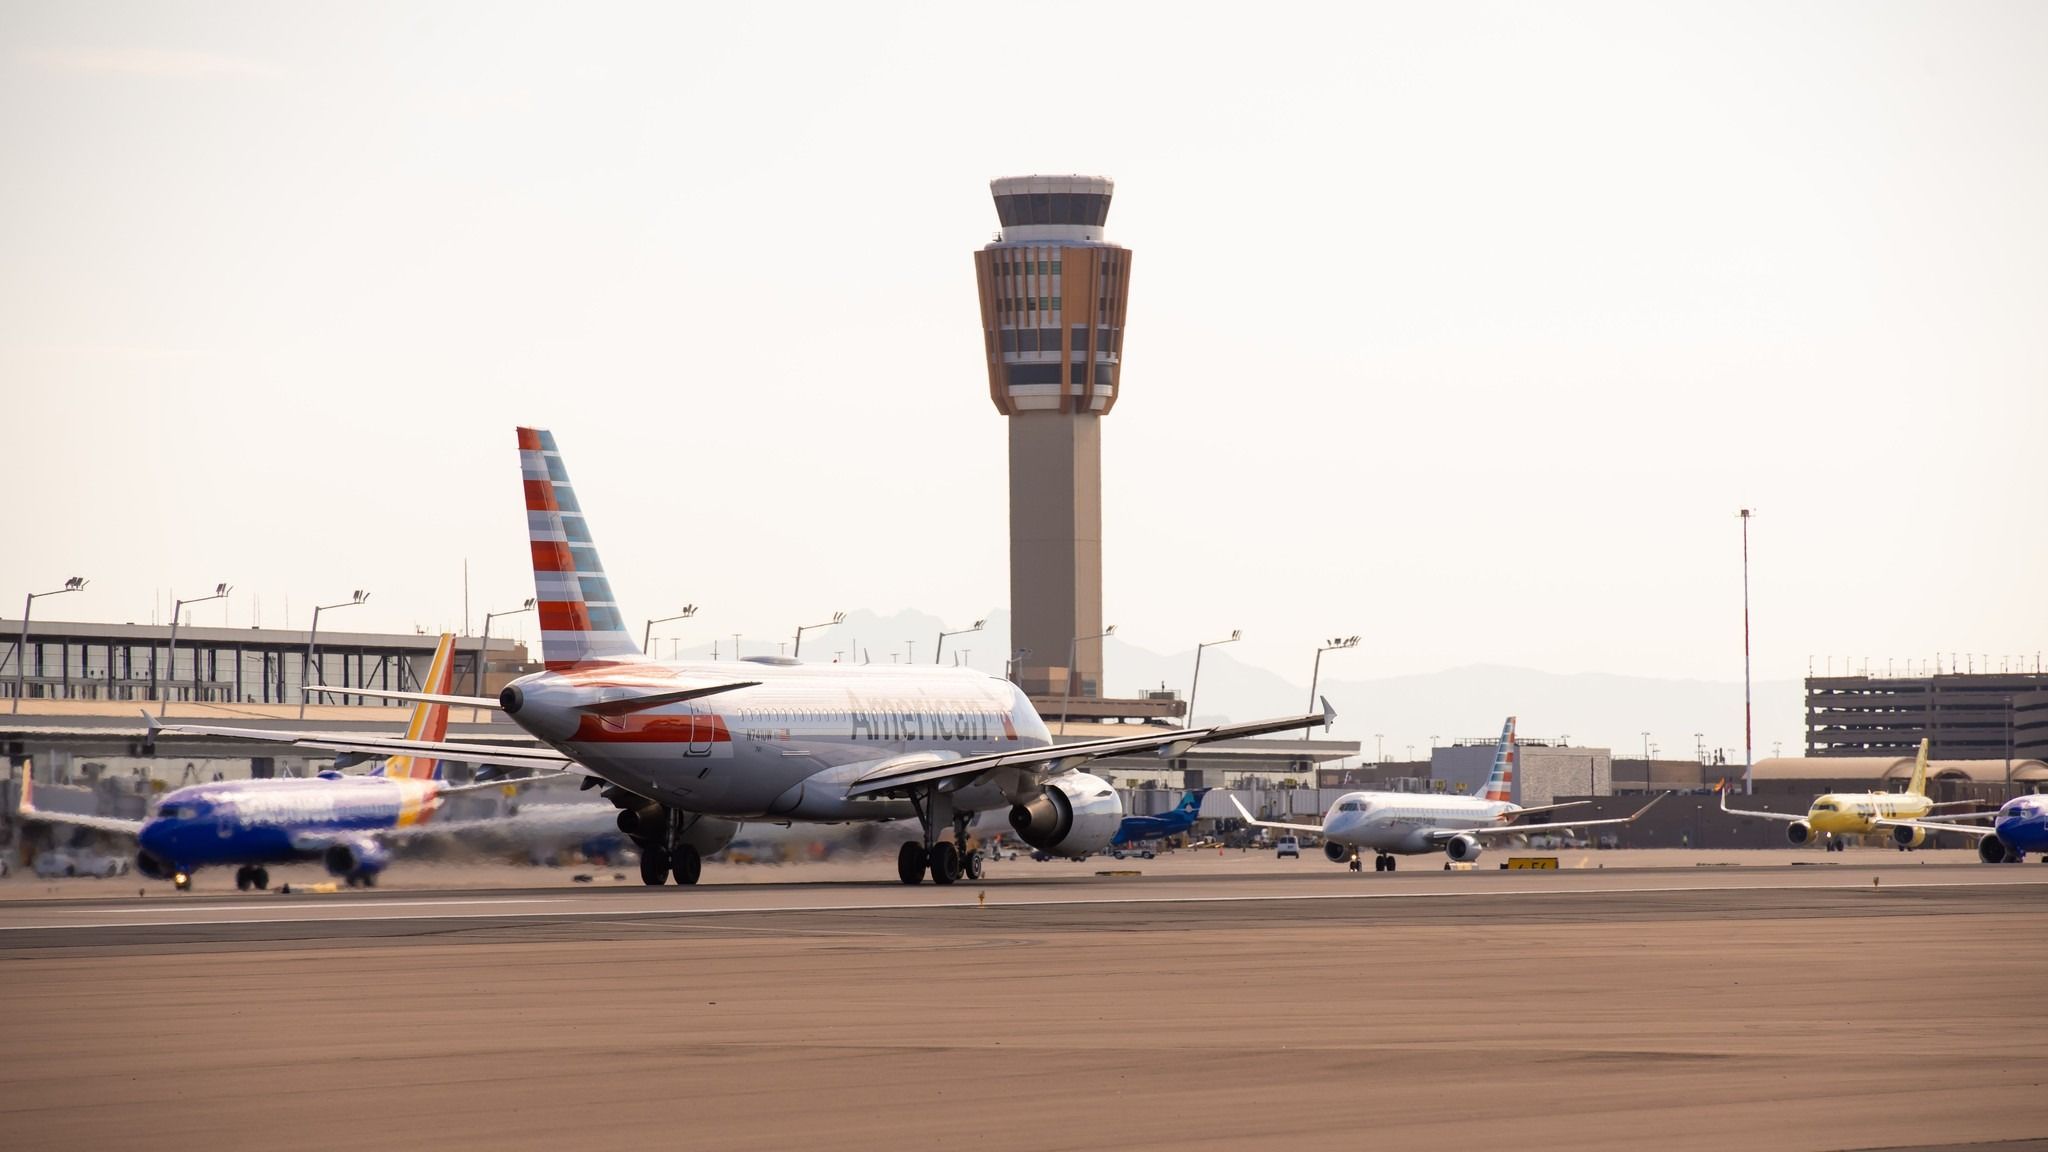 American Airlines Airbus A319 at Phoenix Sky Harbor International Airport.